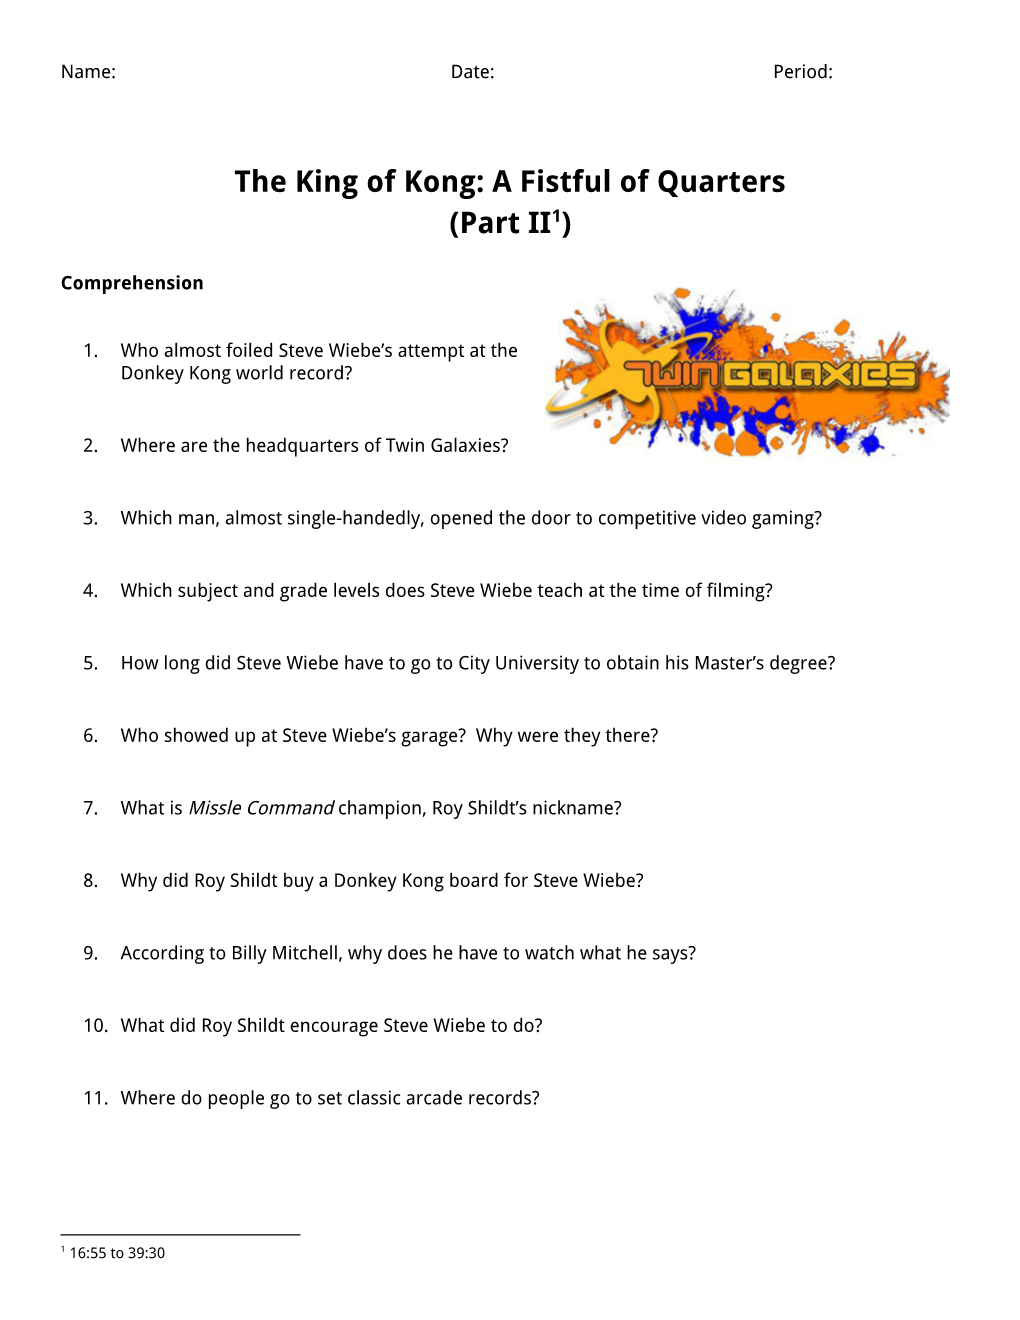 The King of Kong: a Fistful of Quarters (Part II1)